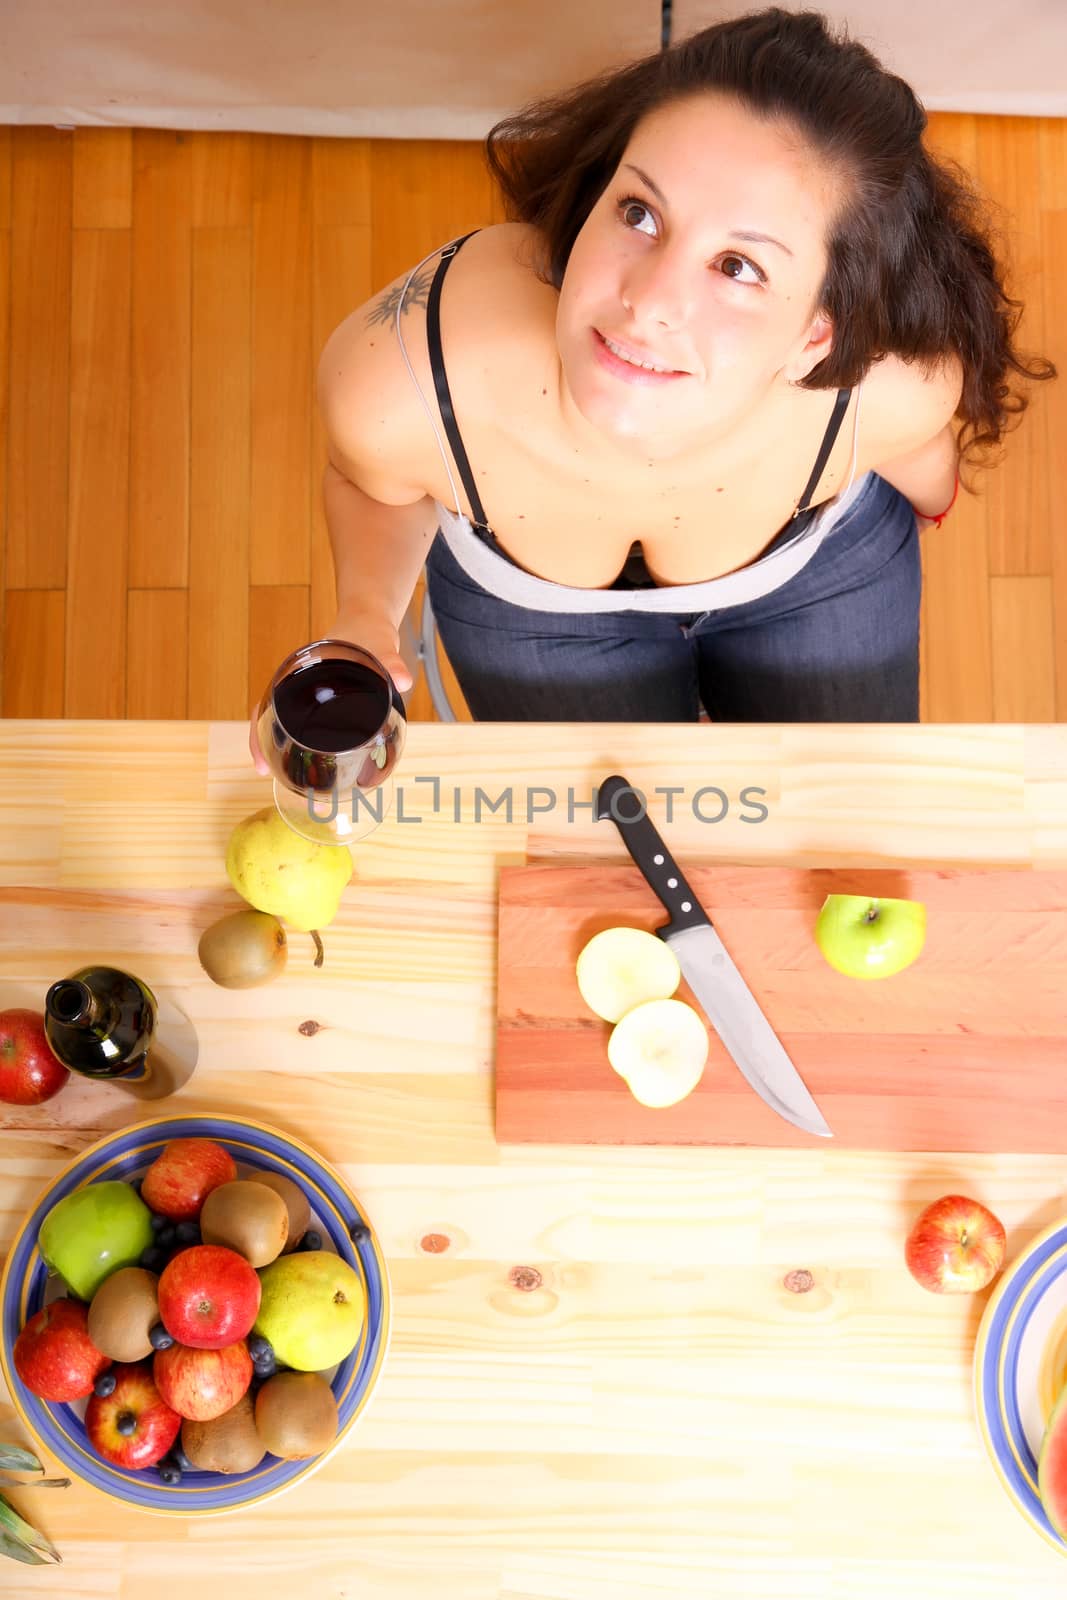 Cutting fruits	 by Spectral